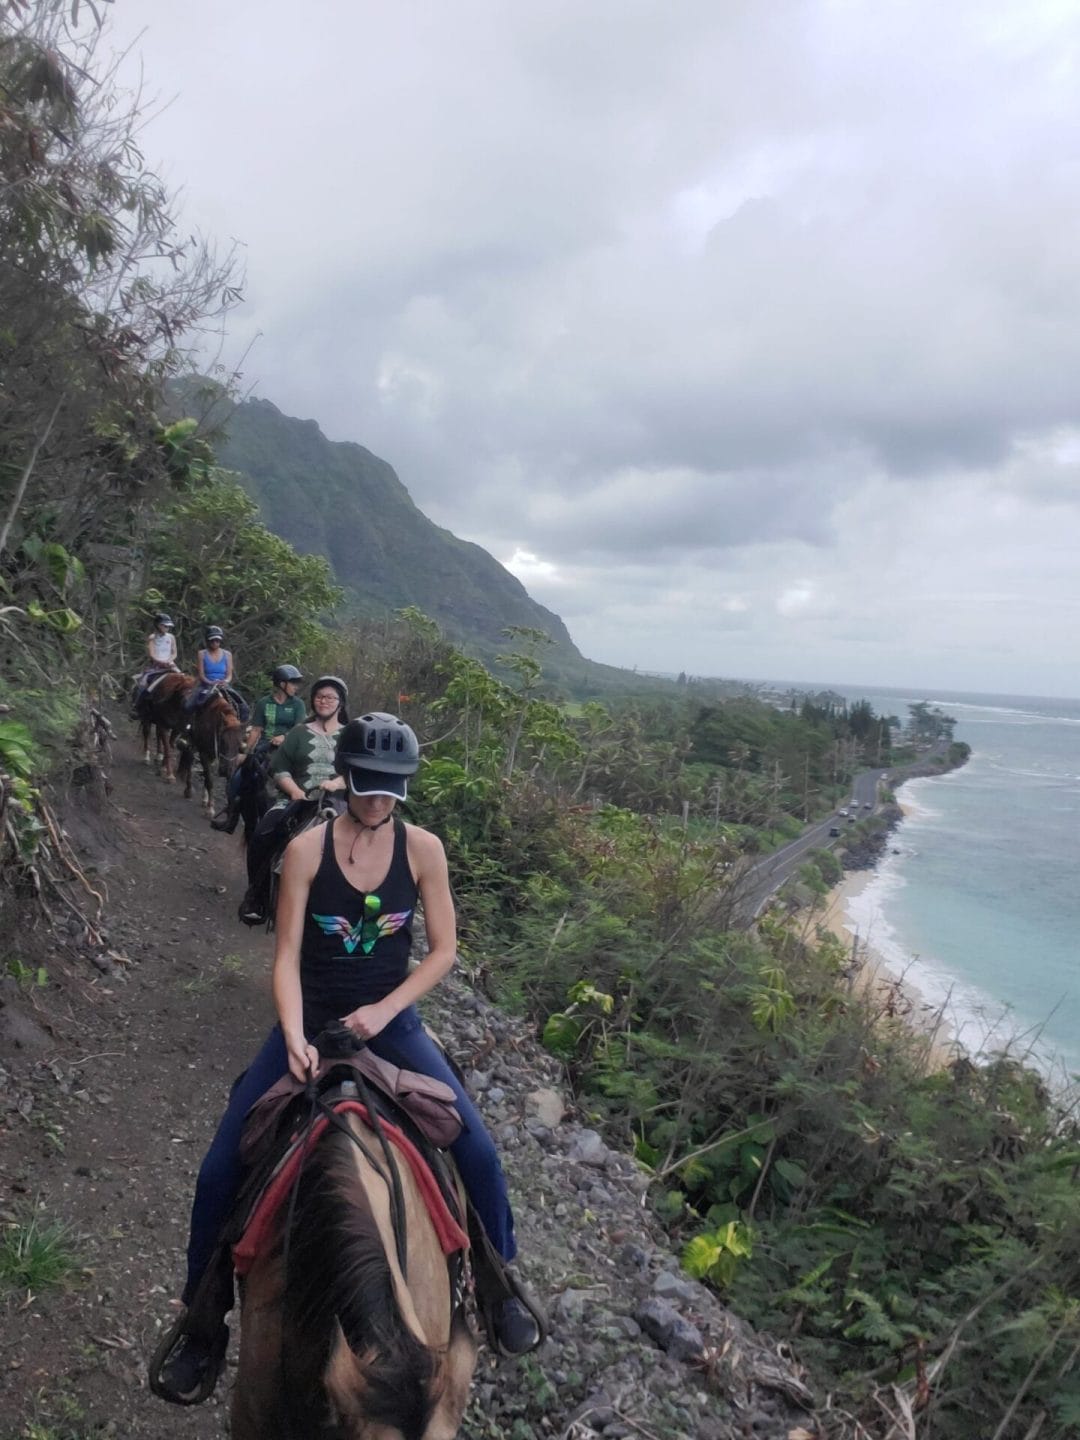 5 women yogis on horseback riding on a mountain trail overlooking the coast of the big island of Hawaii under an overcast sky of light grey clouds